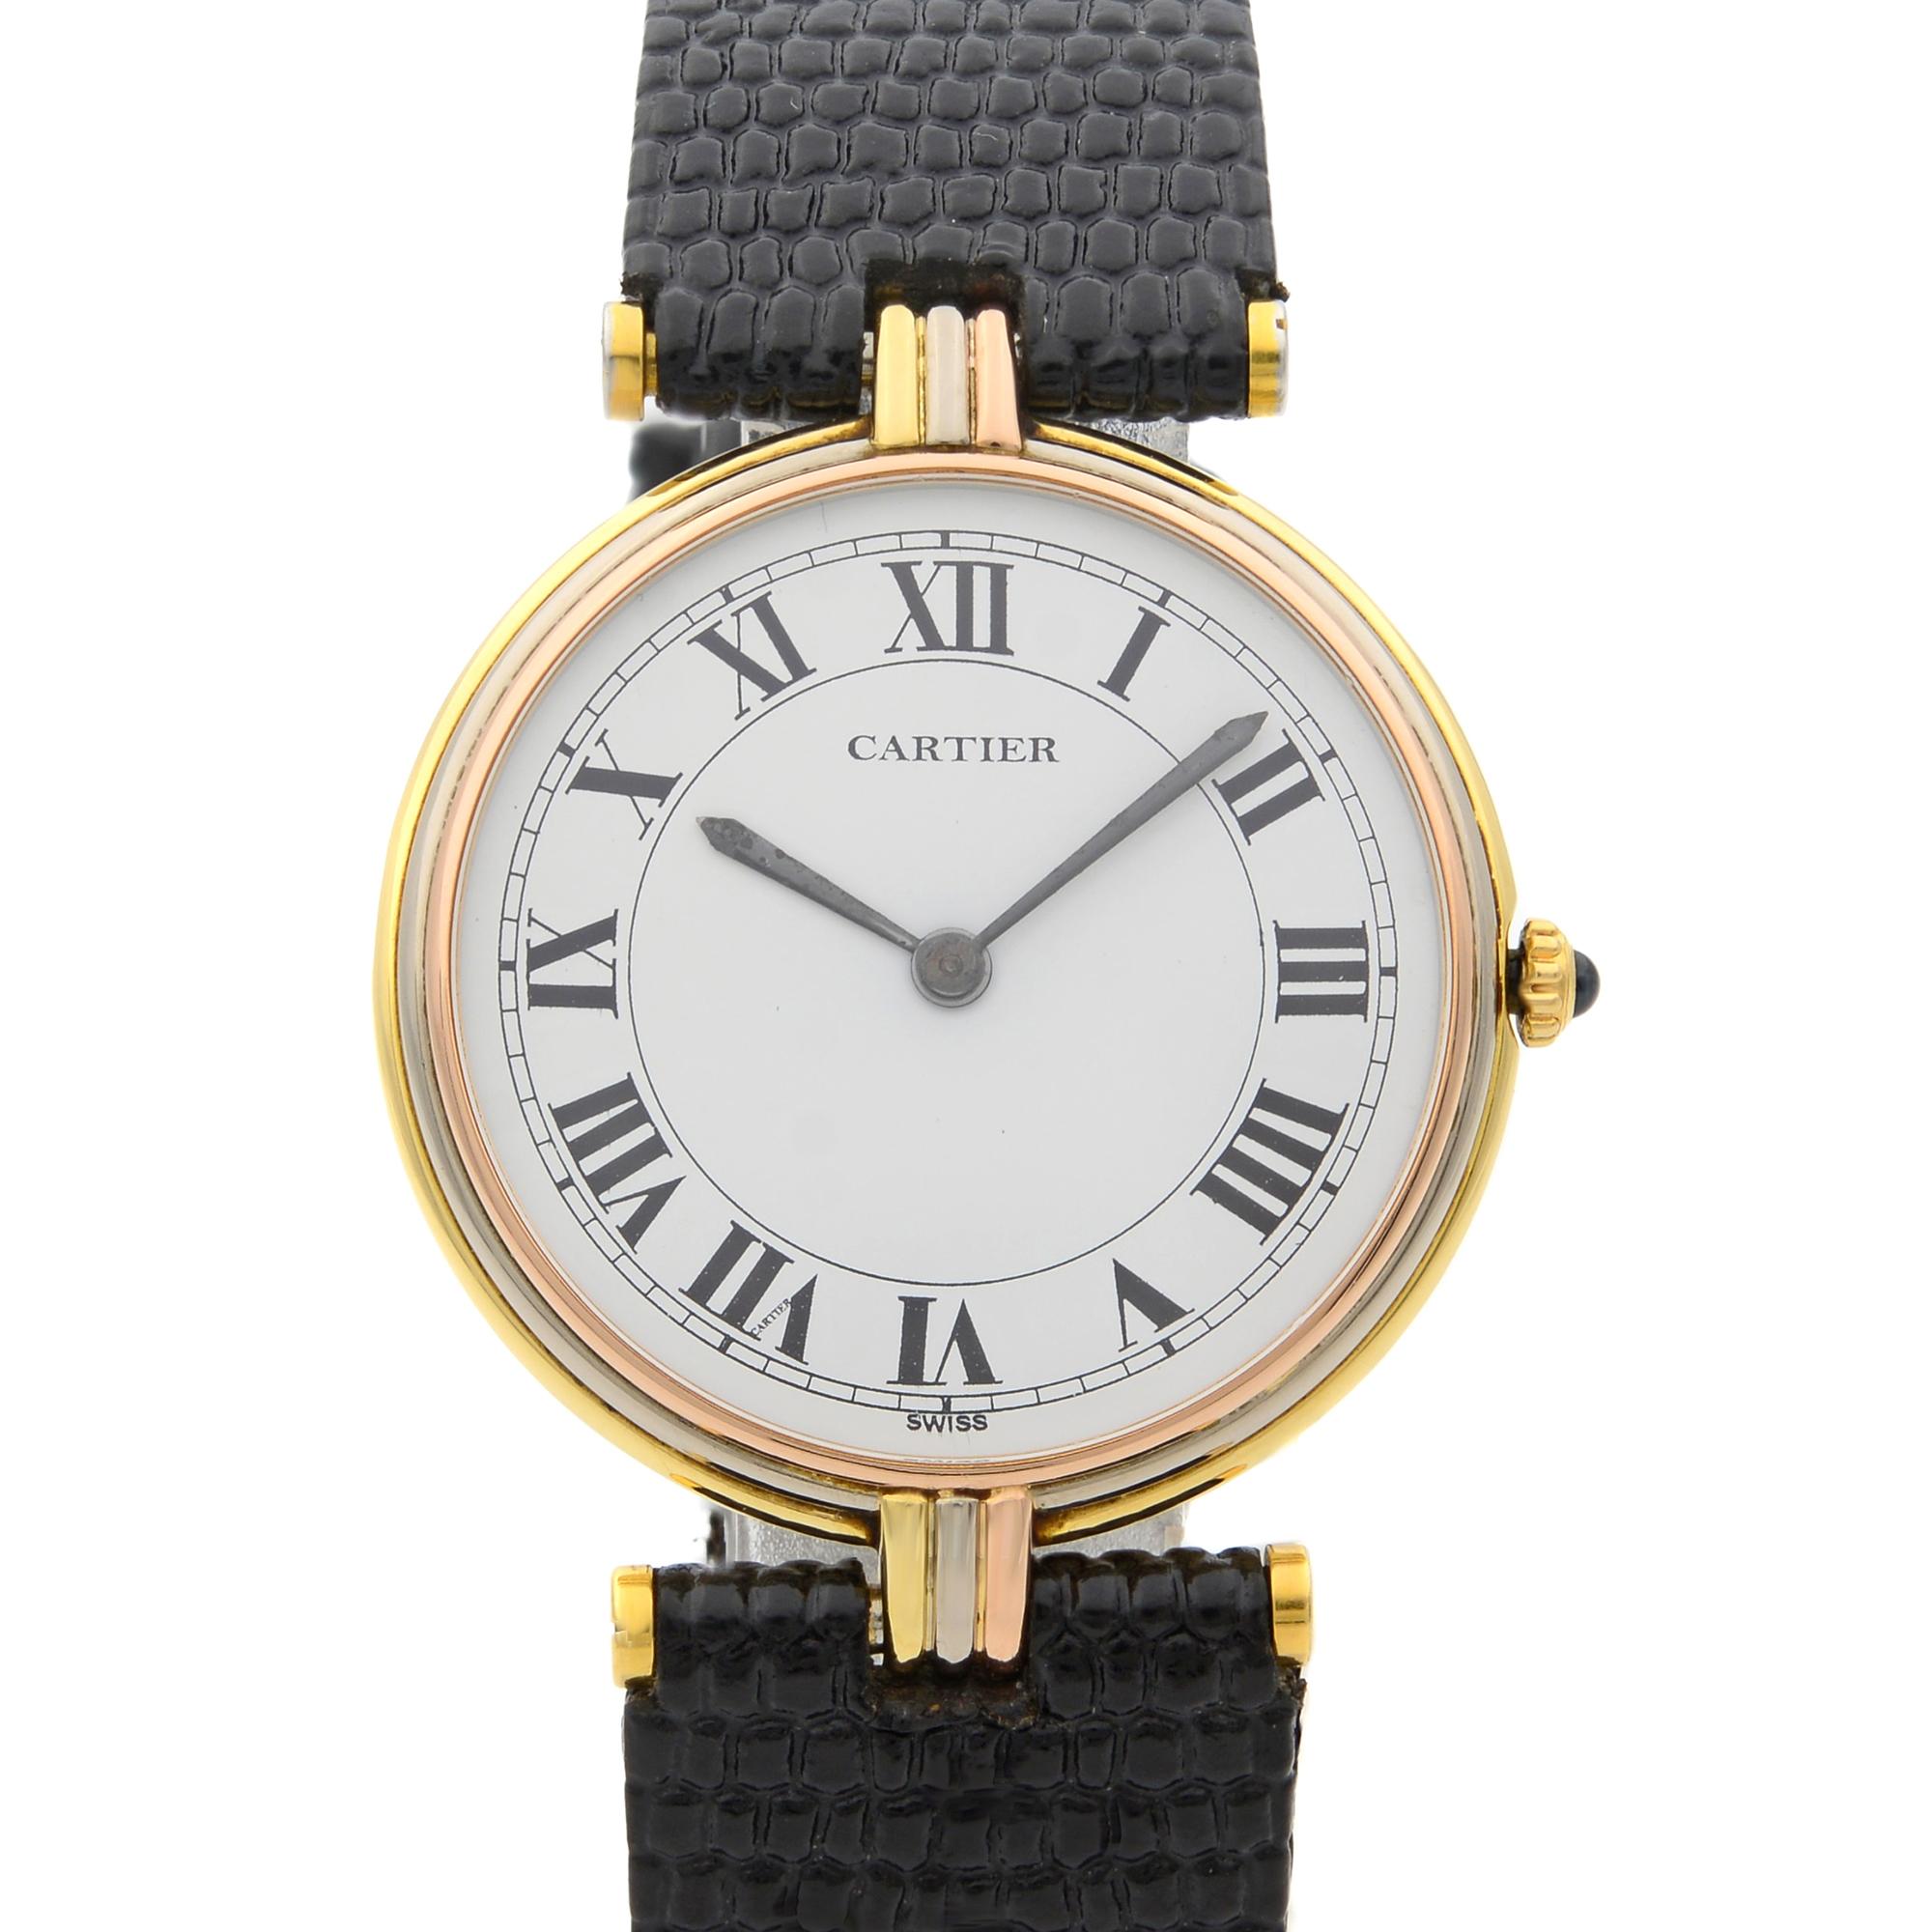 This pre-owned Cartier Paris 8100 is a beautiful Unisex timepiece that is powered by quartz (battery) movement which is cased in a yellow gold case. It has a round shape face, no features dial and has hand roman numerals style markers. It is